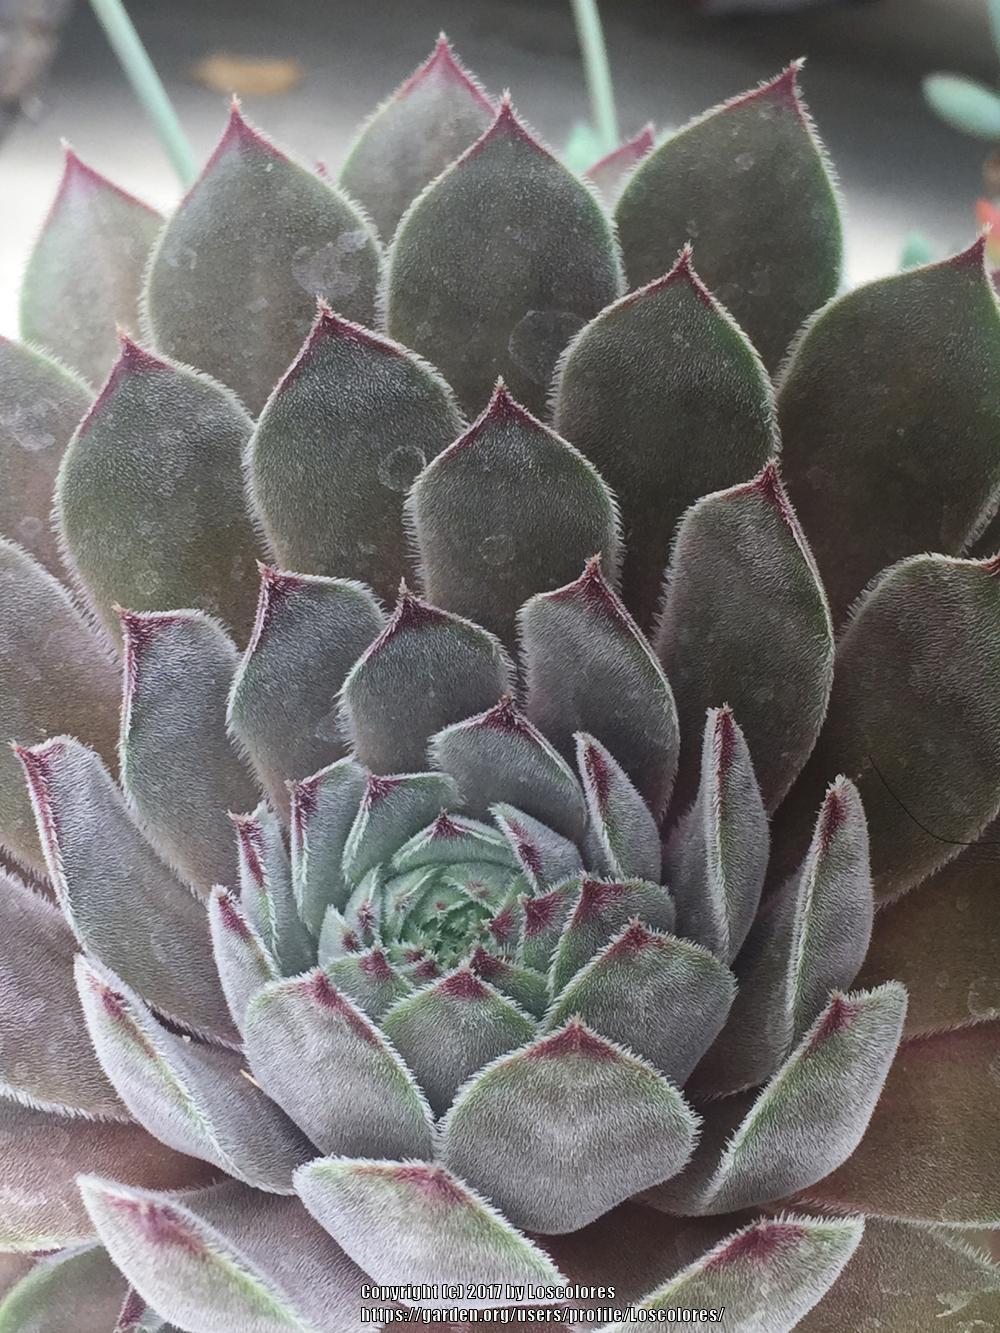 Photo of Hen and Chicks (Sempervivum 'Belladonna') uploaded by Loscolores